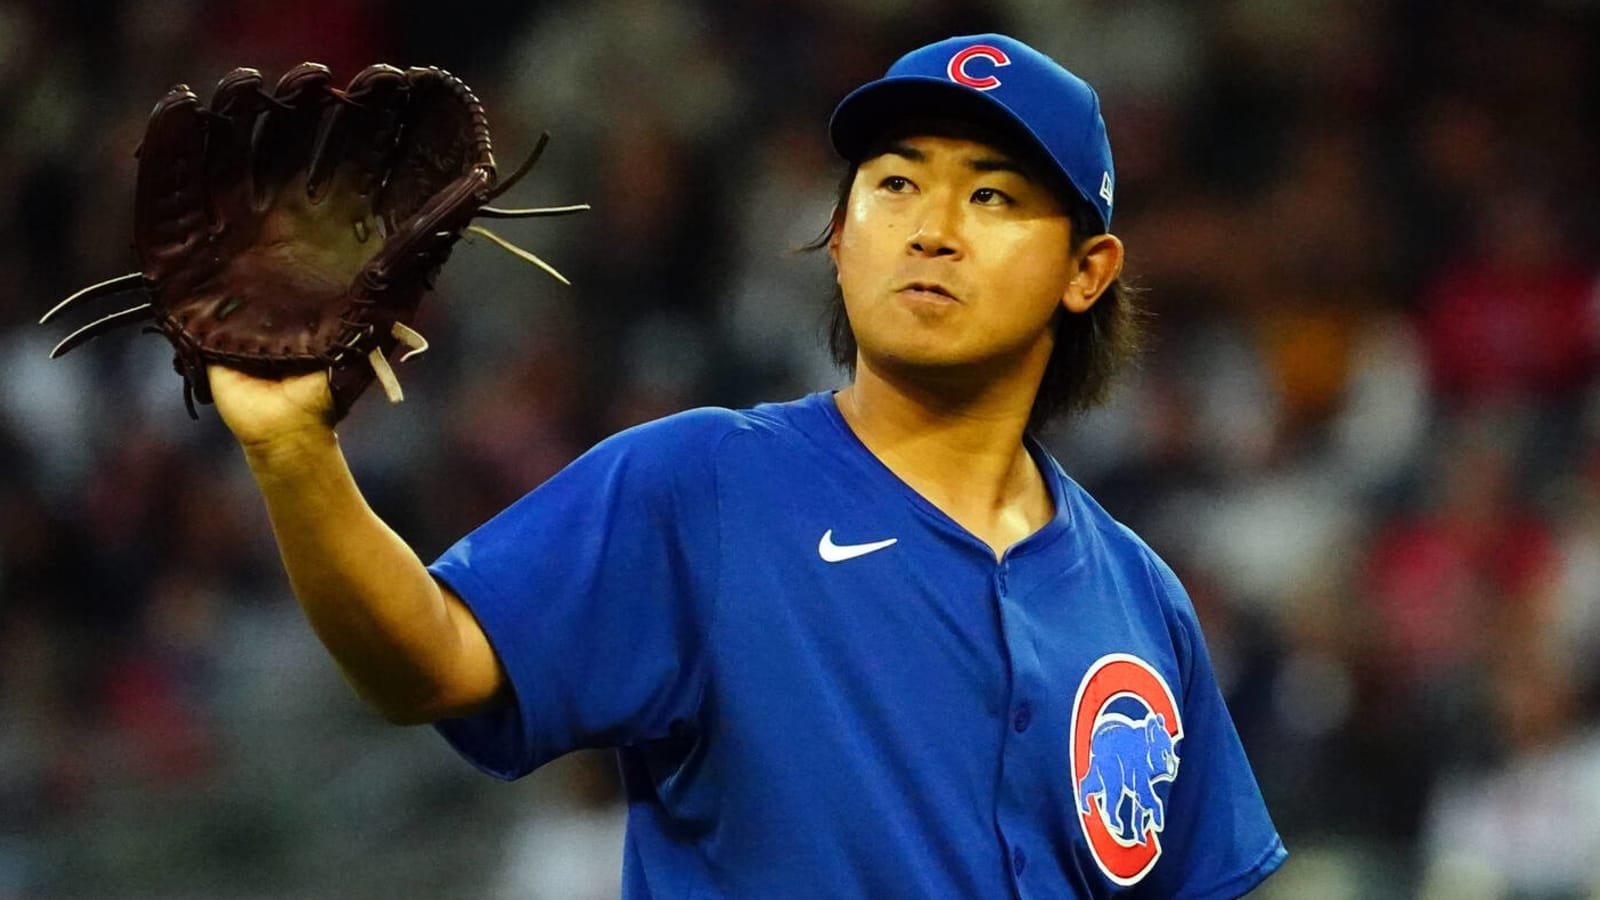 Cubs manager reveals reason behind historic rookie's extended layoff